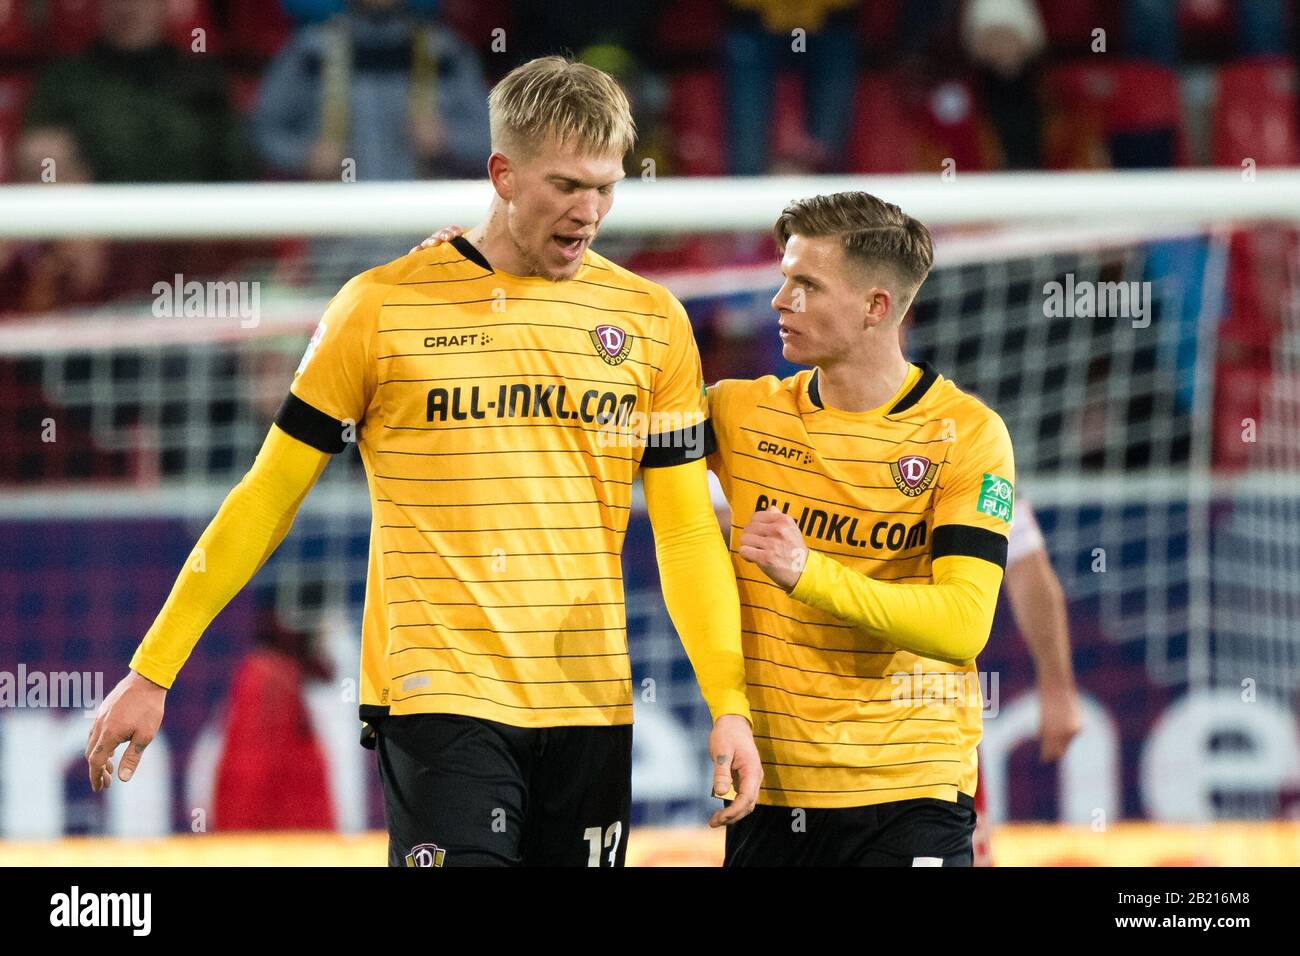 Regensburg, Germany. 28th Feb, 2020. Football: 2nd Bundesliga, Jahn Regensburg - Dynamo Dresden, 24th matchday in the Continental Arena. Goalscorer Simon Makienok Christoffersen from Dynamo Dresden (l) cheers with Dzenis Burnic about his goal for 1:2. Credit: Matthias Balk/dpa - IMPORTANT NOTE: In accordance with the regulations of the DFL Deutsche Fußball Liga and the DFB Deutscher Fußball-Bund, it is prohibited to exploit or have exploited in the stadium and/or from the game taken photographs in the form of sequence images and/or video-like photo series./dpa/Alamy Live News Stock Photo